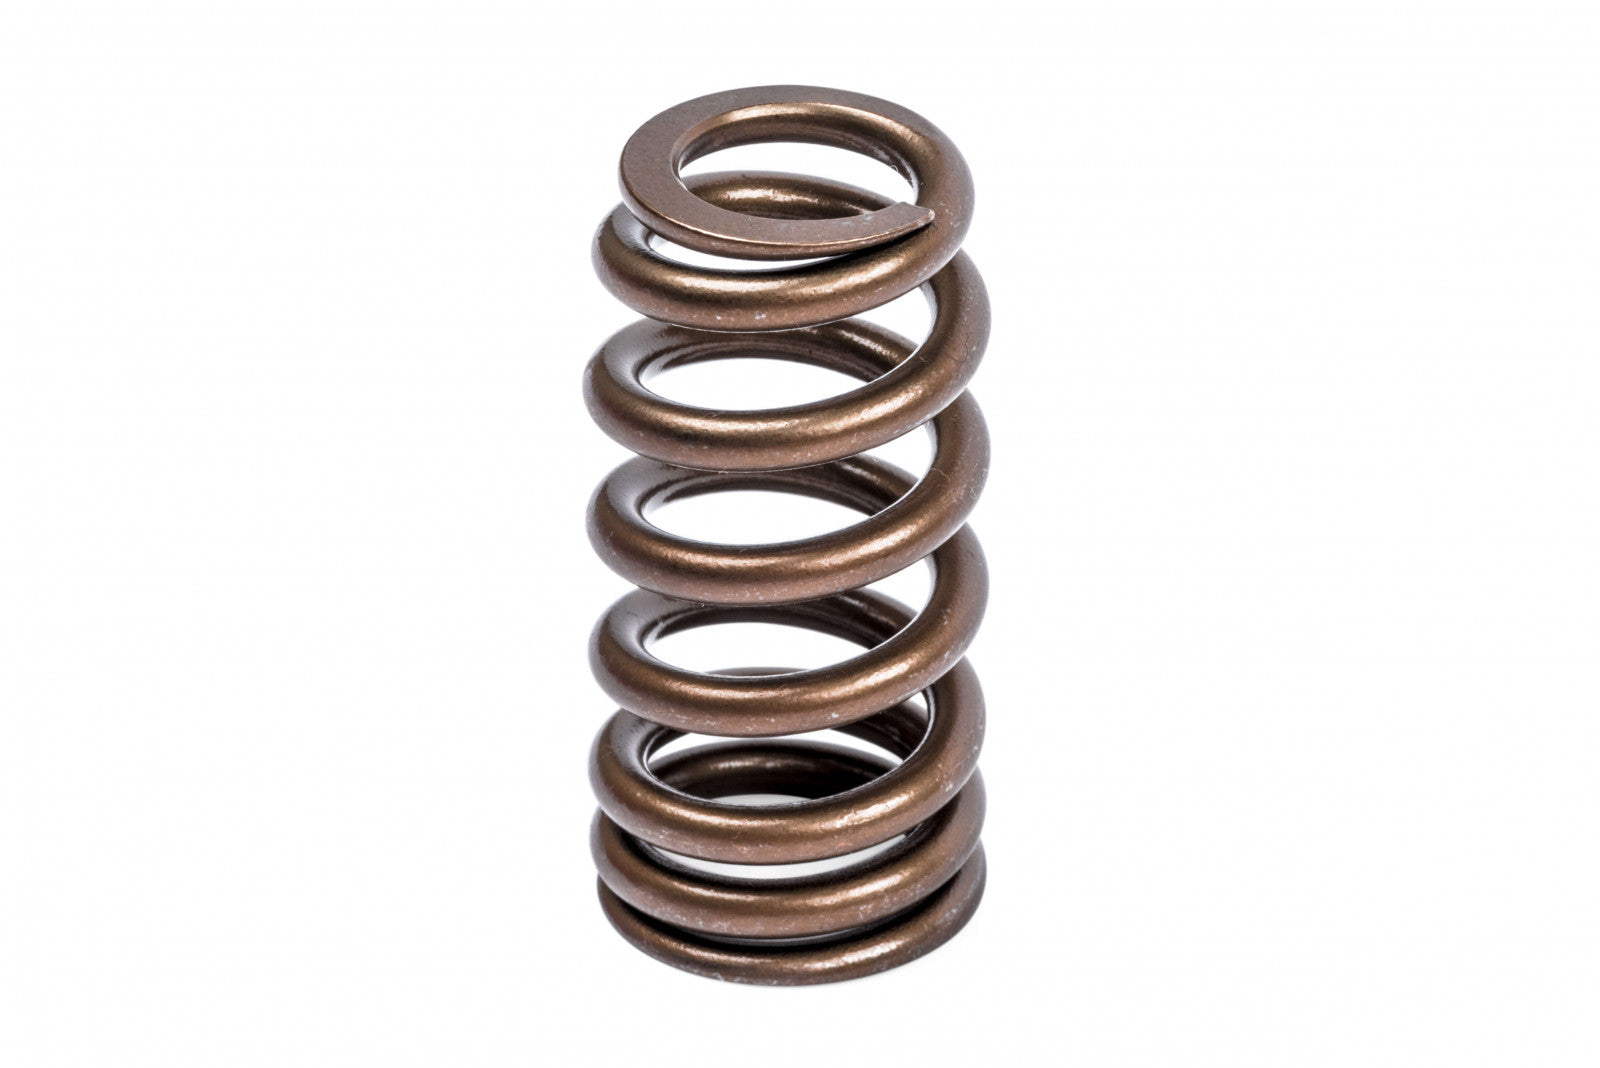 APR Valve Springs/Seats/Retainers - Set of 24